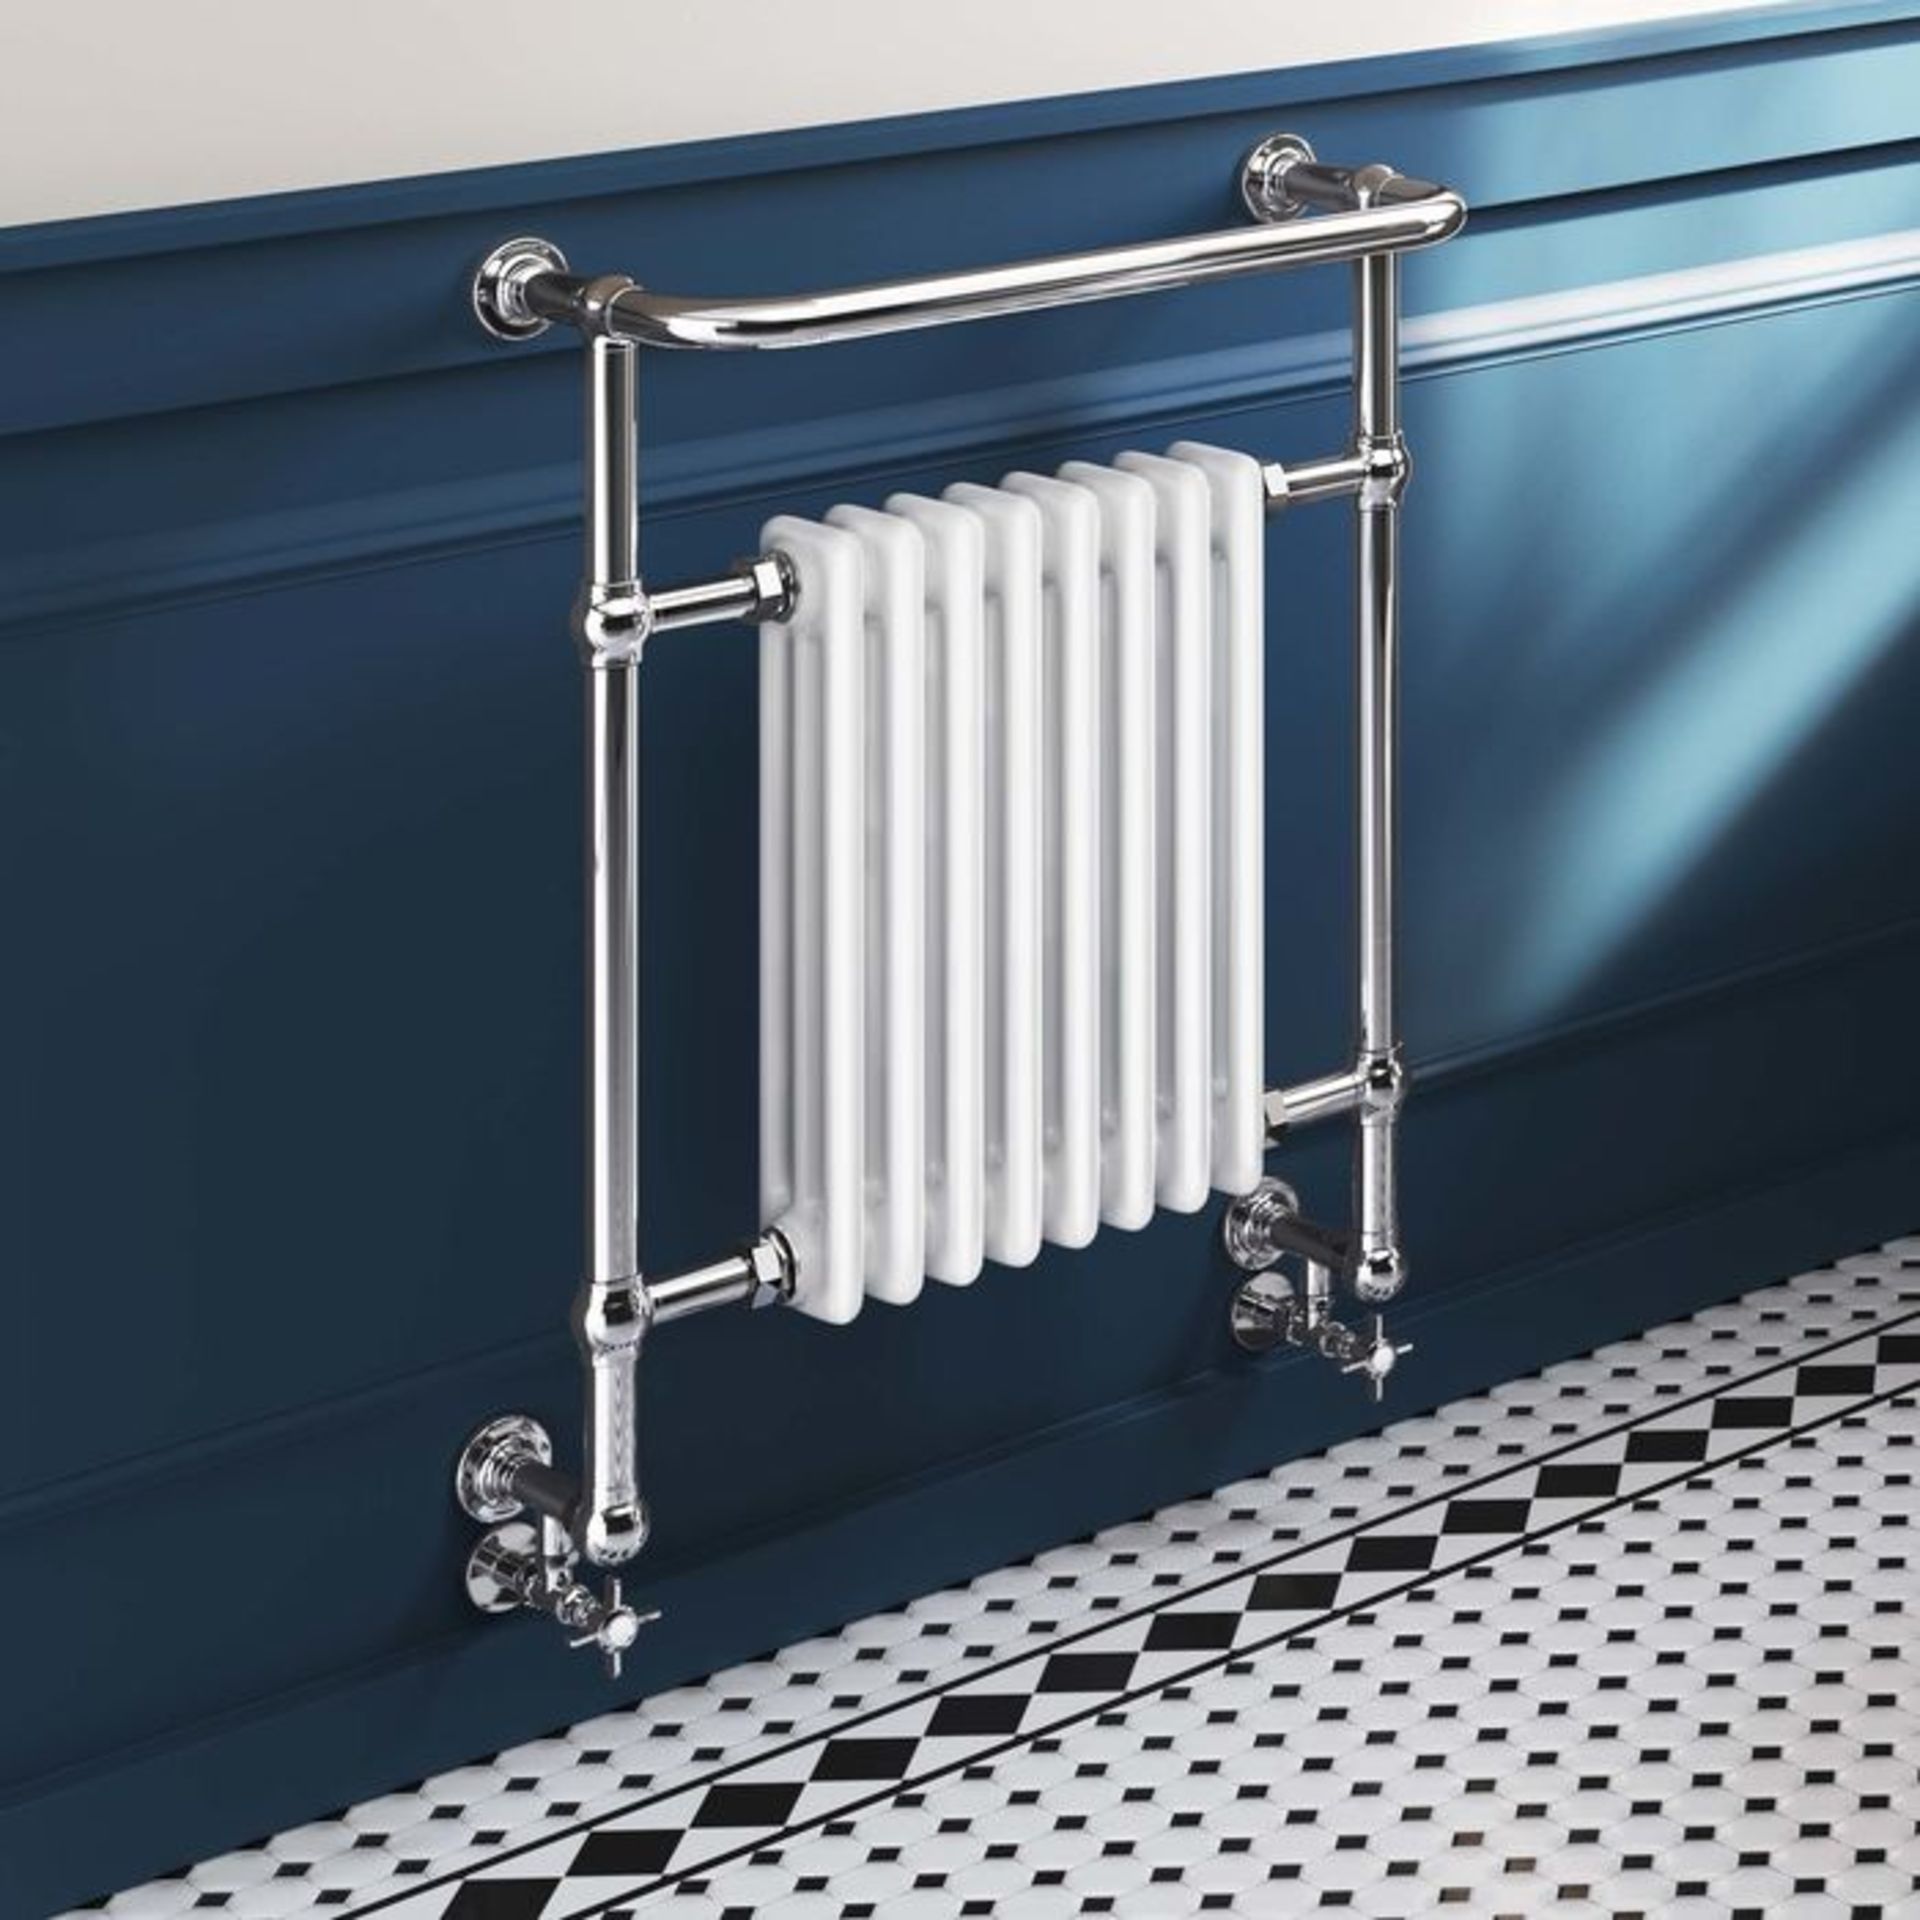 (PO165) 826x659mm Traditional White Wall Mounted Towel Rail Radiator - Cambridge. Made from low